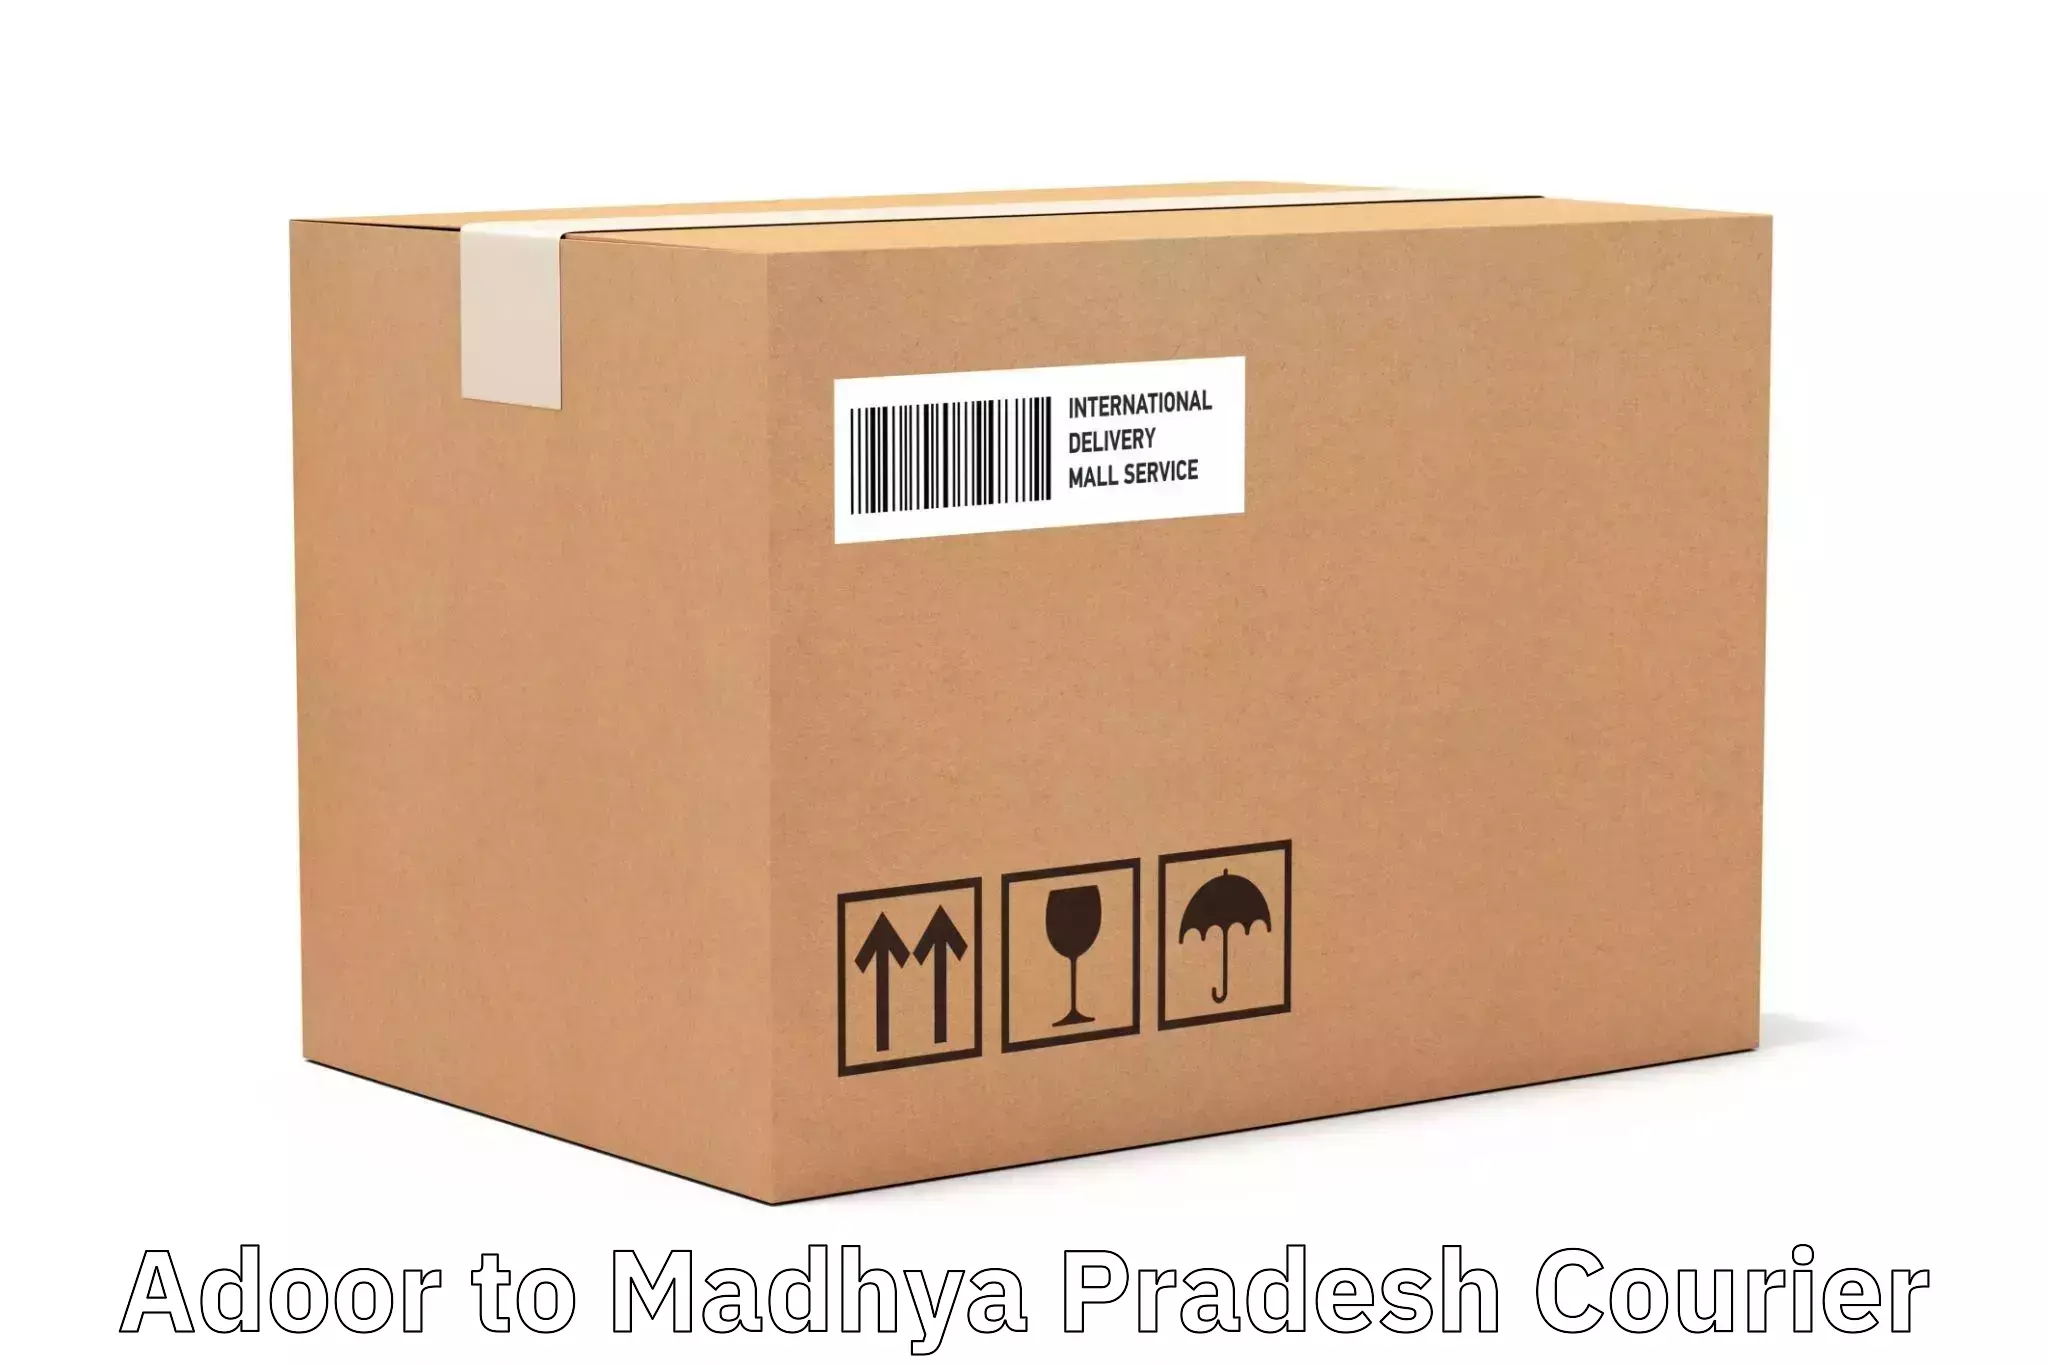 Parcel handling and care Adoor to Madwas